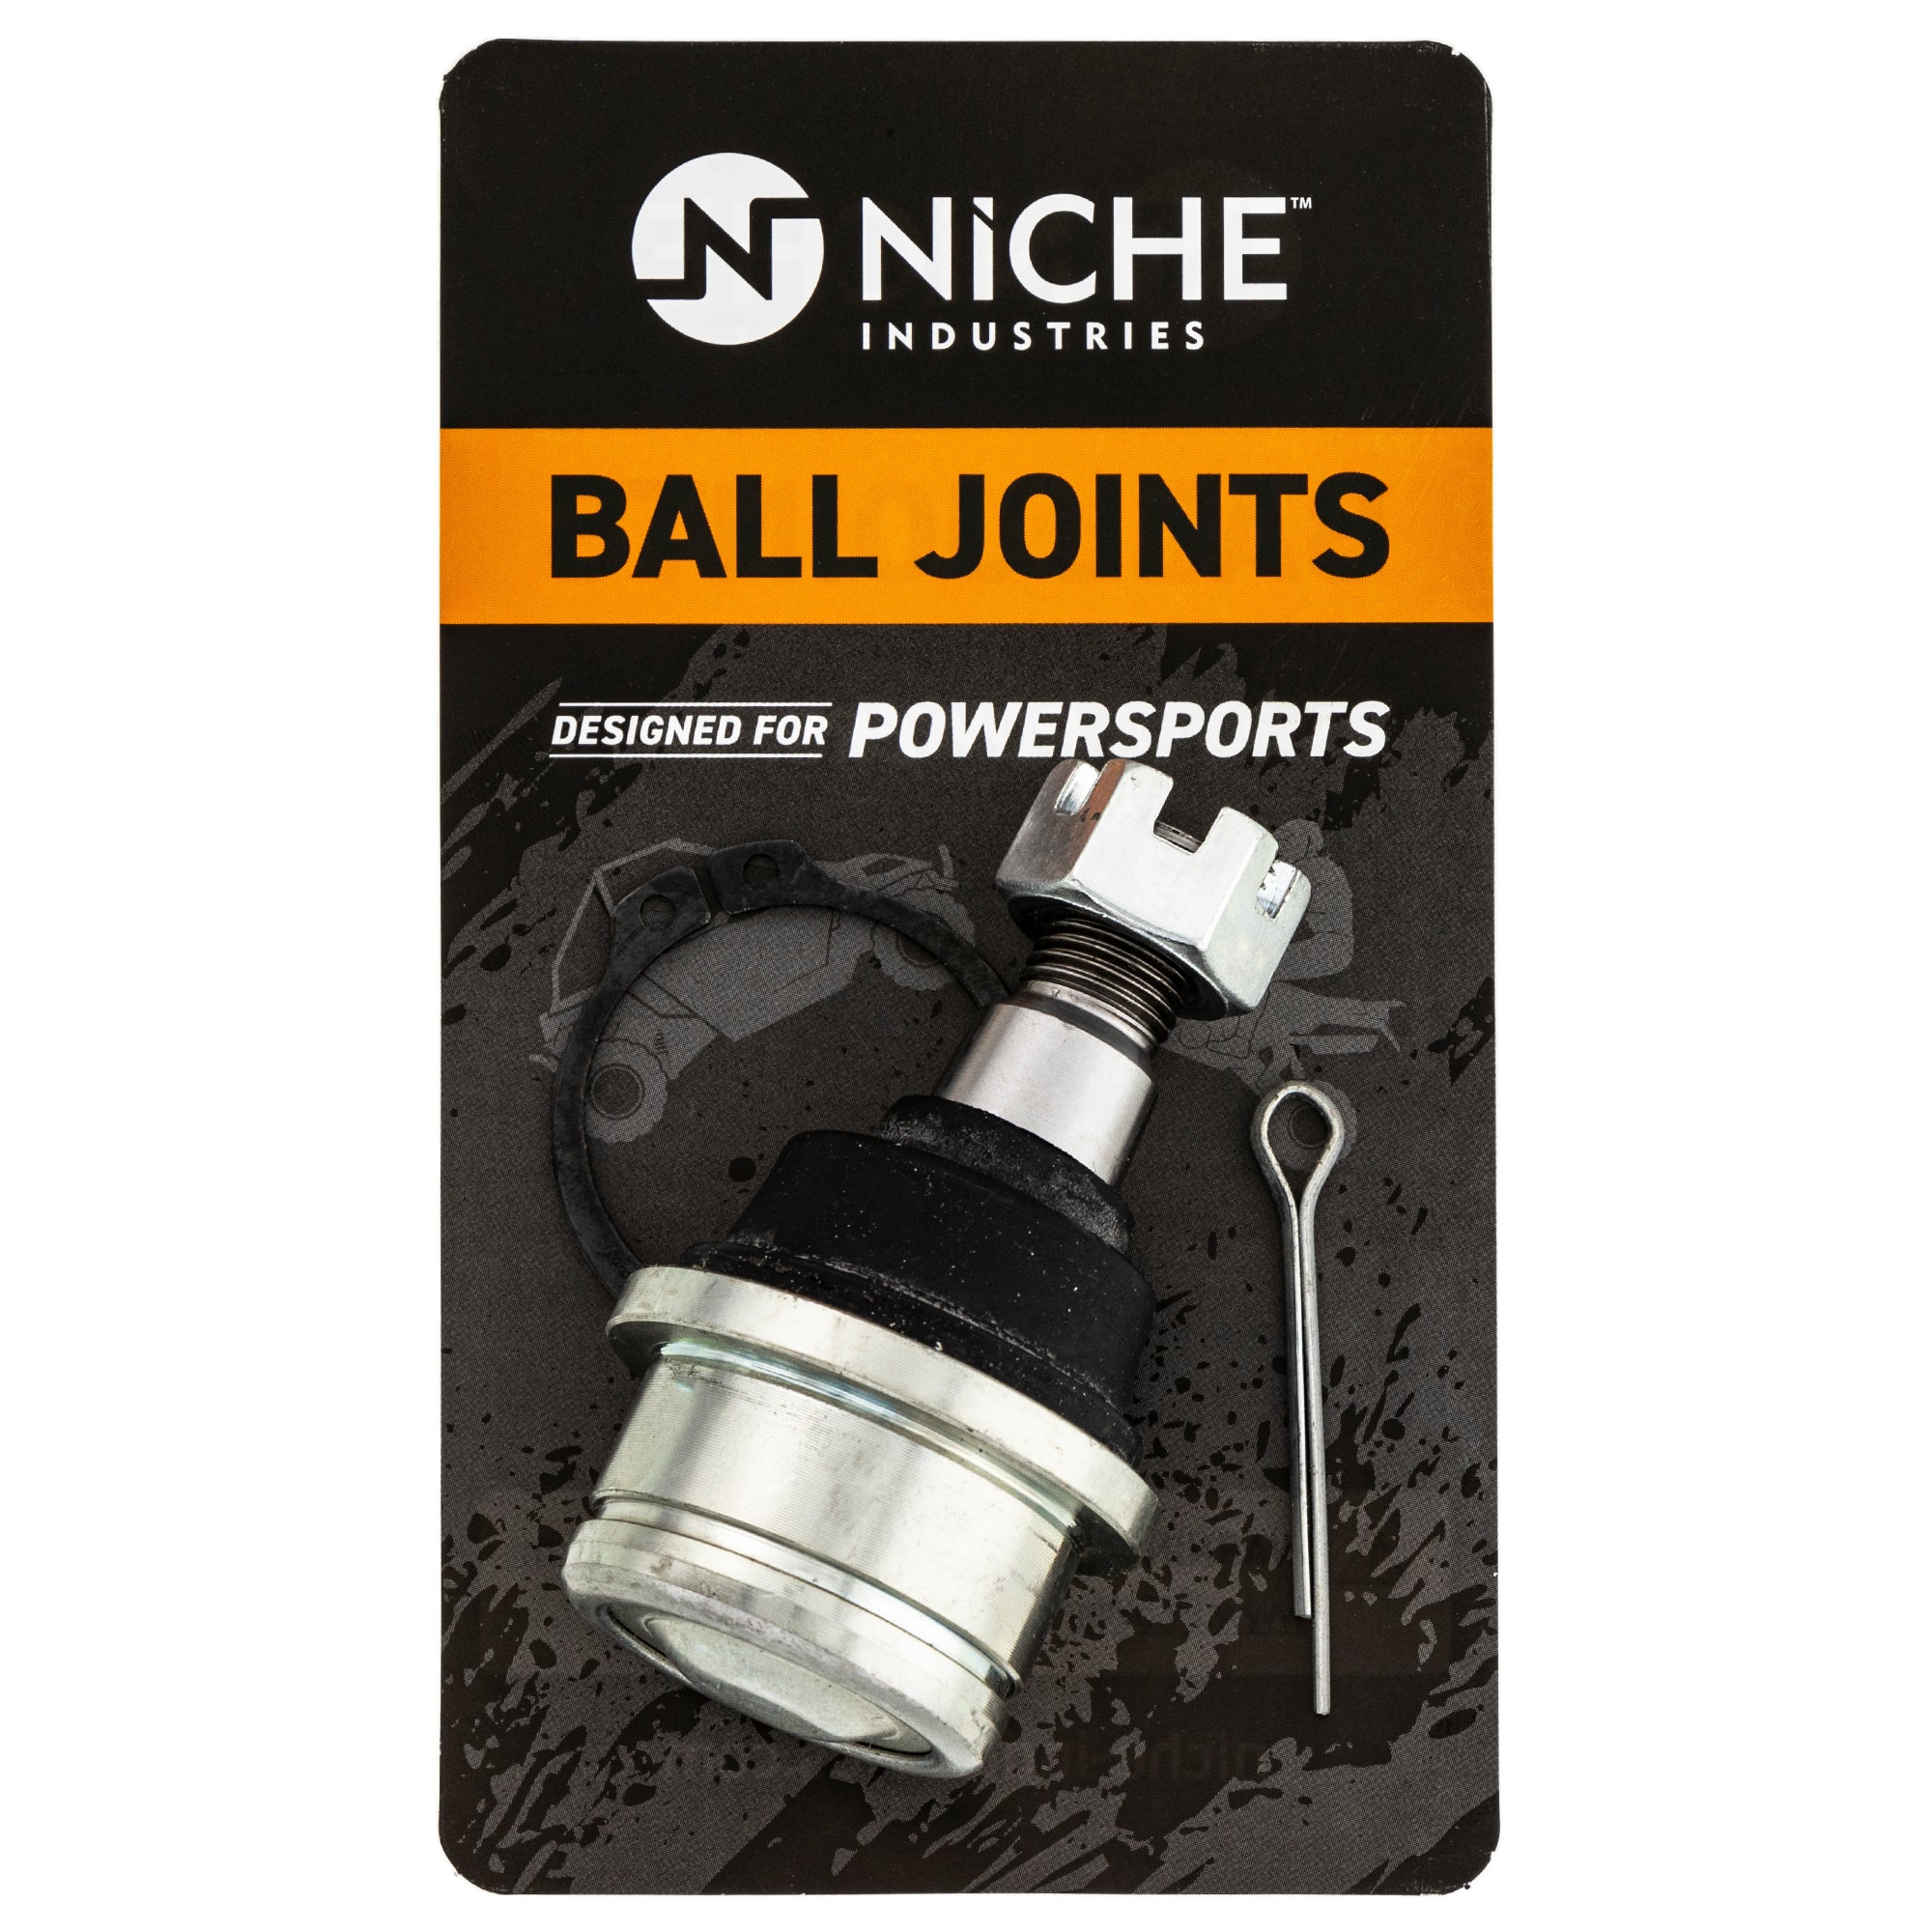 Ball Joint Upper for zOTHER Western Power Sports Honda EPI Performance Rincon Rancher NICHE 519-CBJ2233T